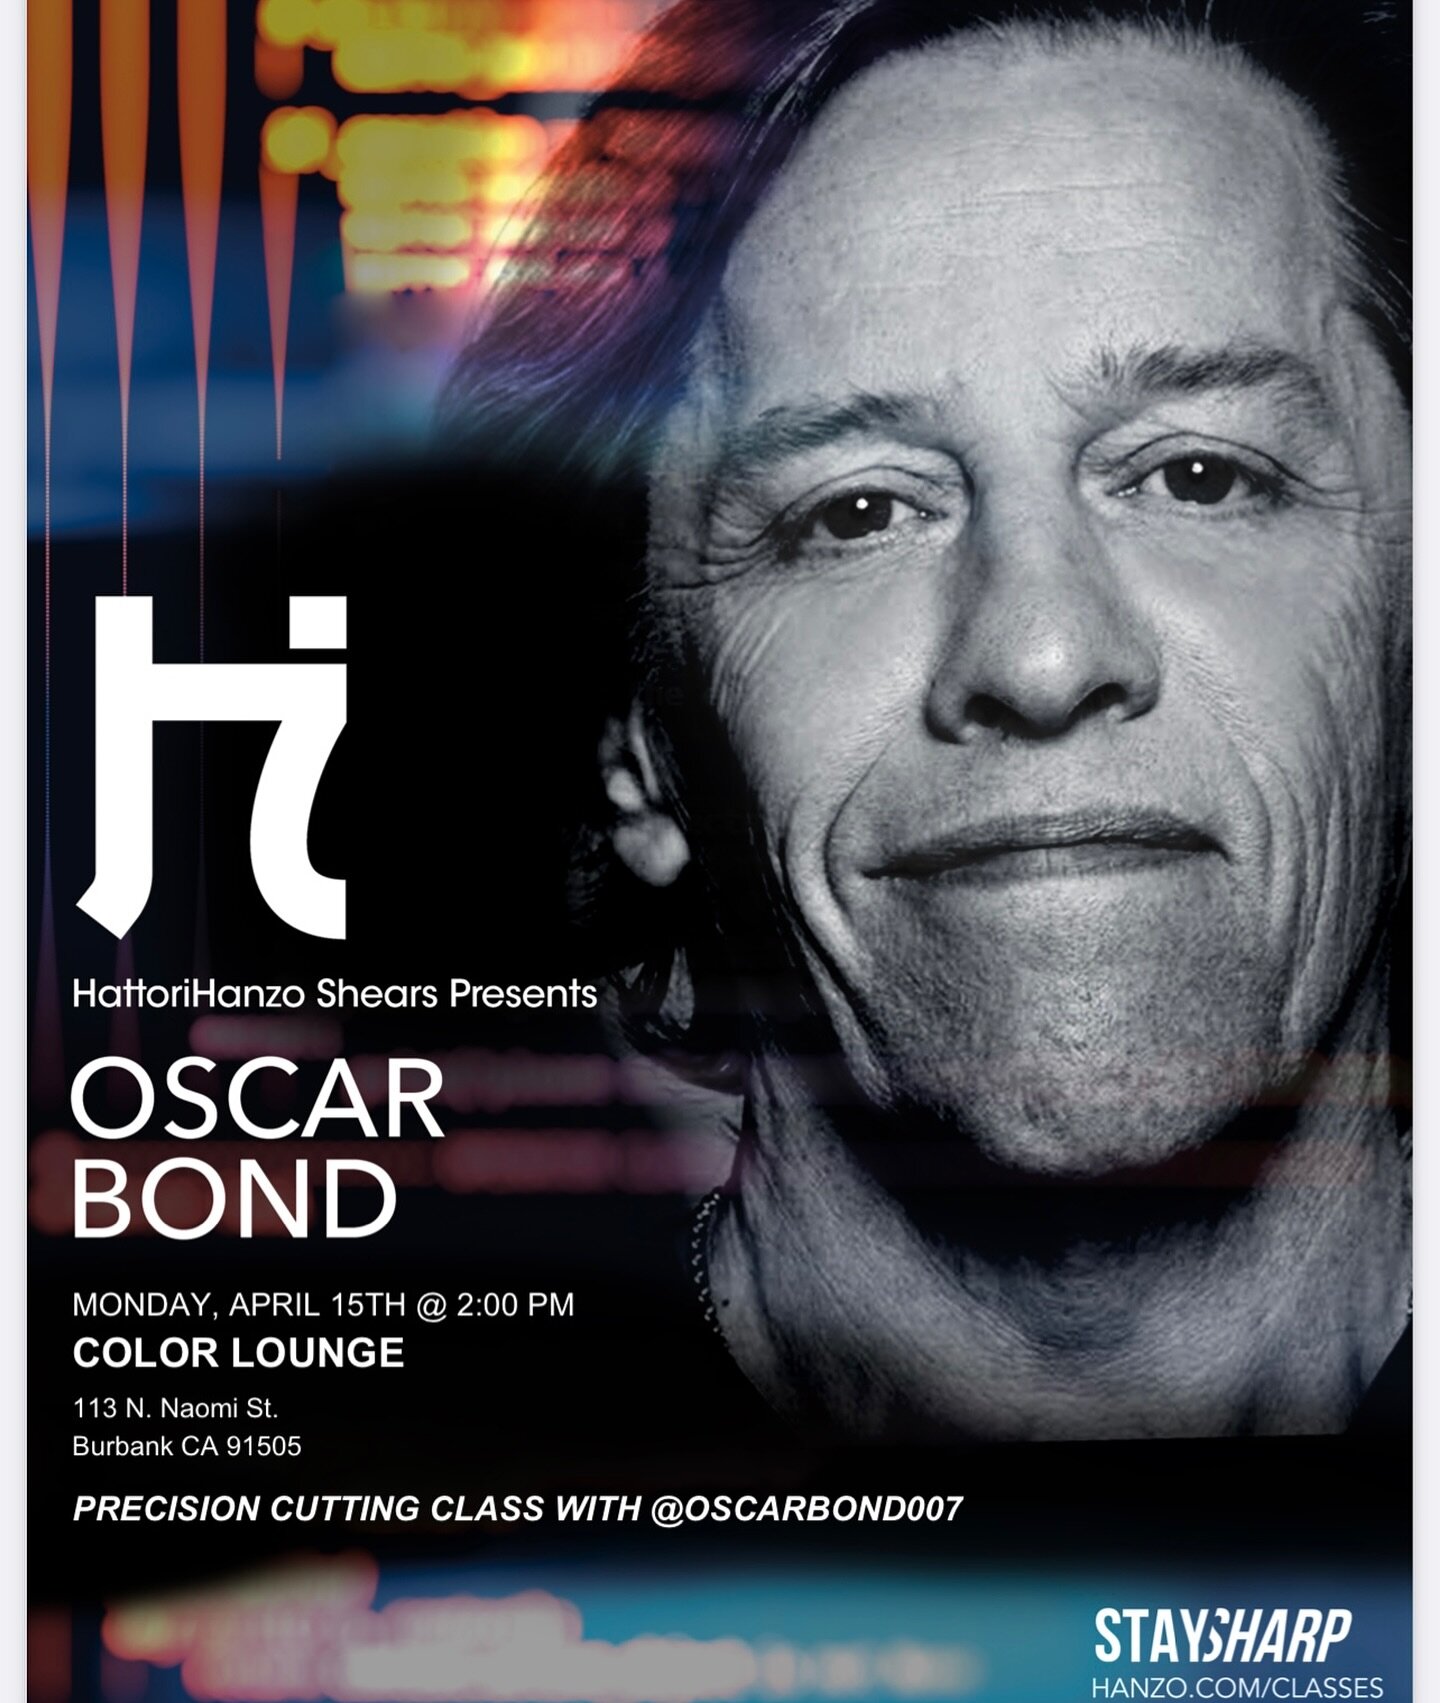 Precision Cutting Class with @oscarbond007 is set for MONDAY, April 15 at 2PM at Color Lounge hair salon (113 N. Naomi St. Burbank, CA 91505) off of Olive Ave. right across Poquito Mas. (Street parking only)
.
We have an incredible advanced cutting c